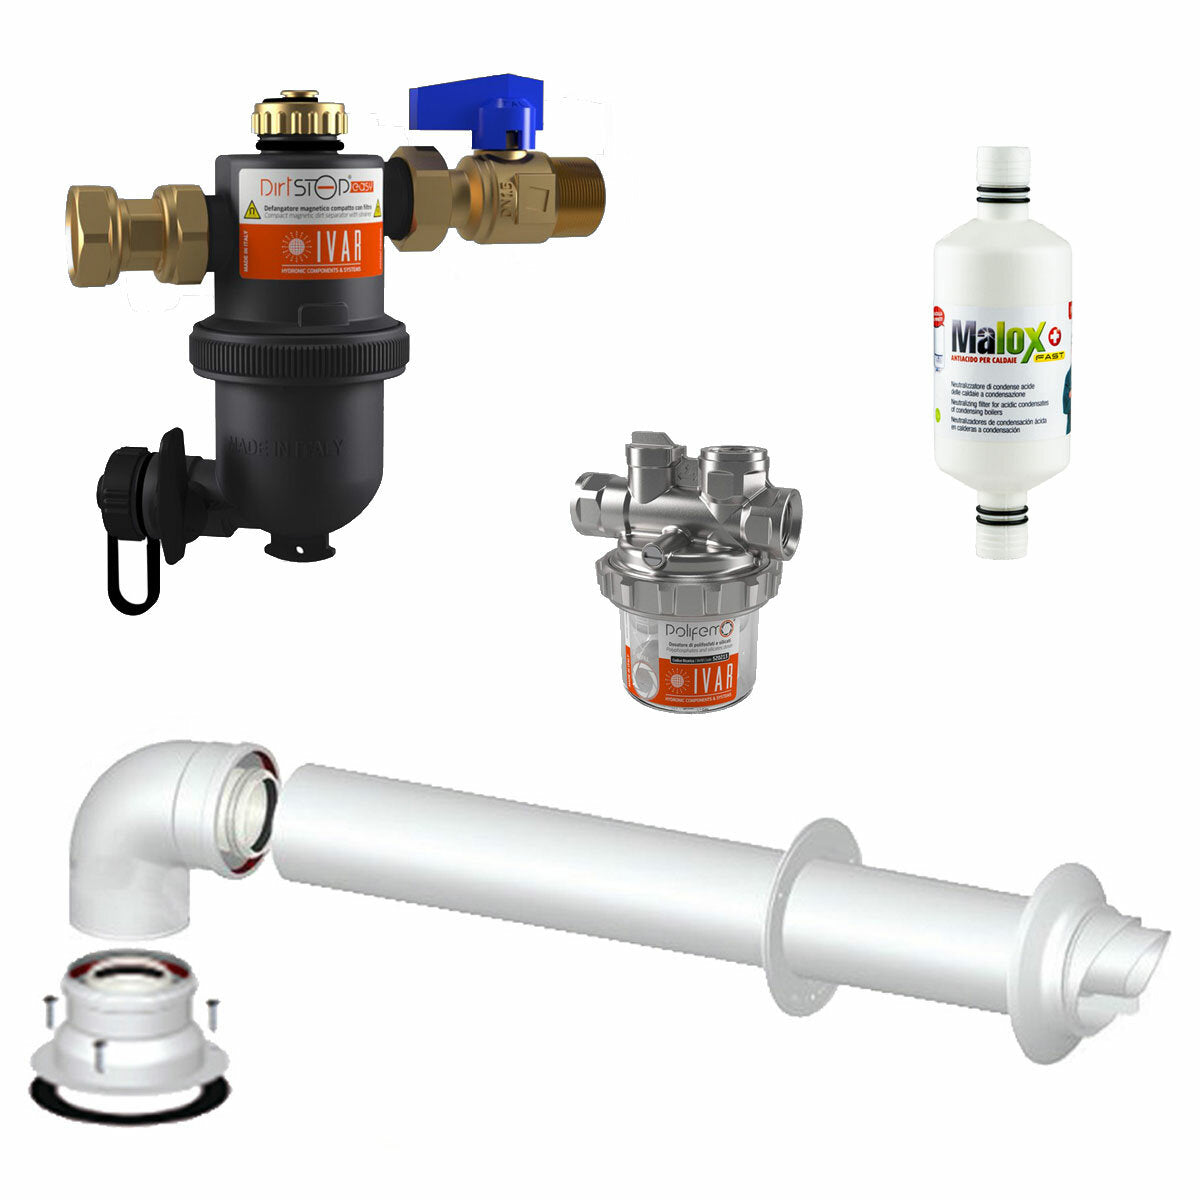 Bosch boiler installation kit with dirt separator - polyphosphate dispenser - condensate neutraliser - coaxial flue gas outlet